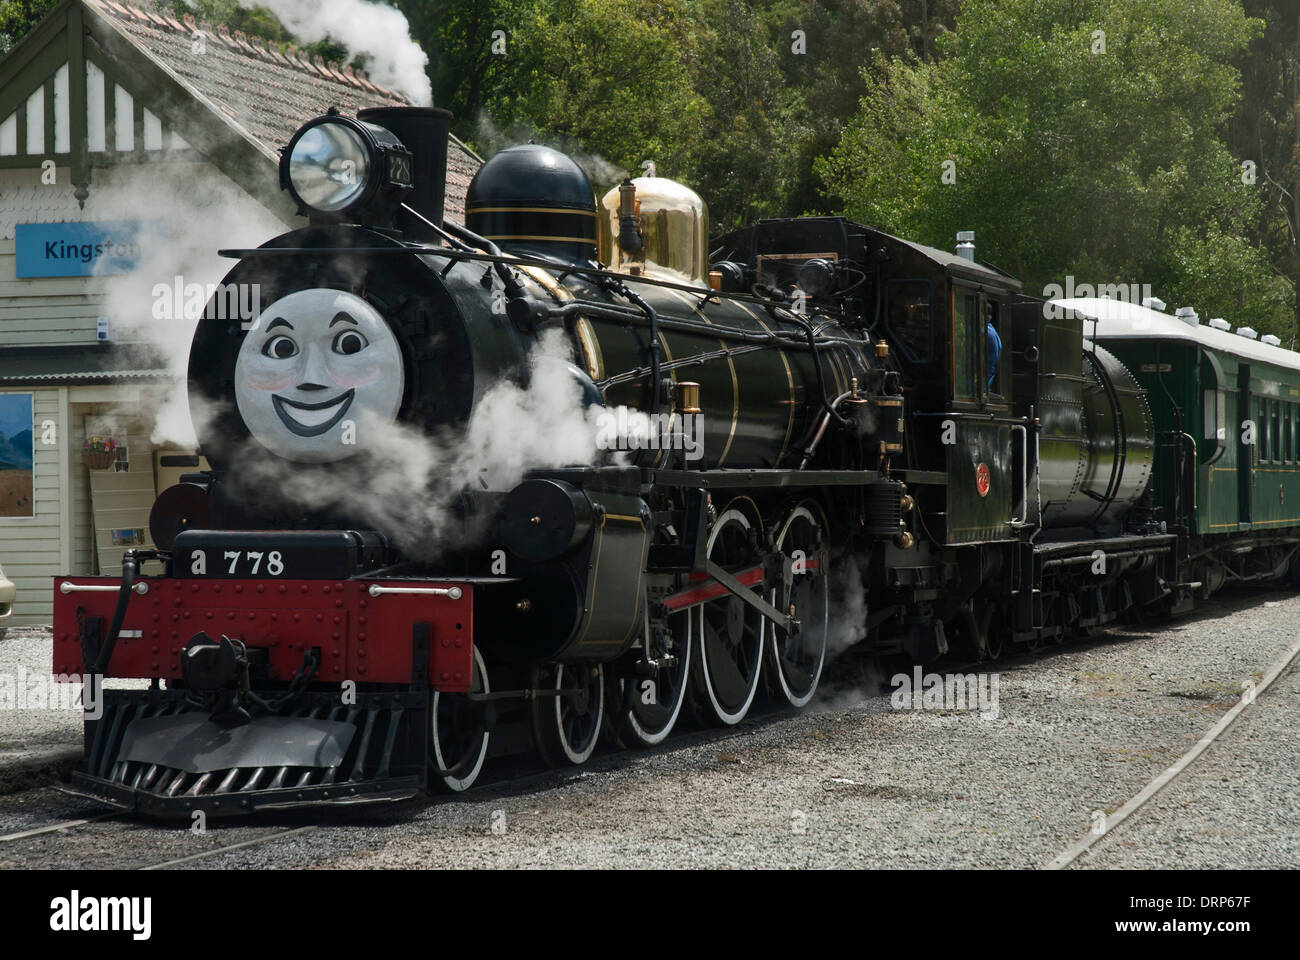 Preserved locomotive the Kingston Flyer about to leave Kingston, South Island, New Zealand with the face of Thomas the Tank engi Stock Photo